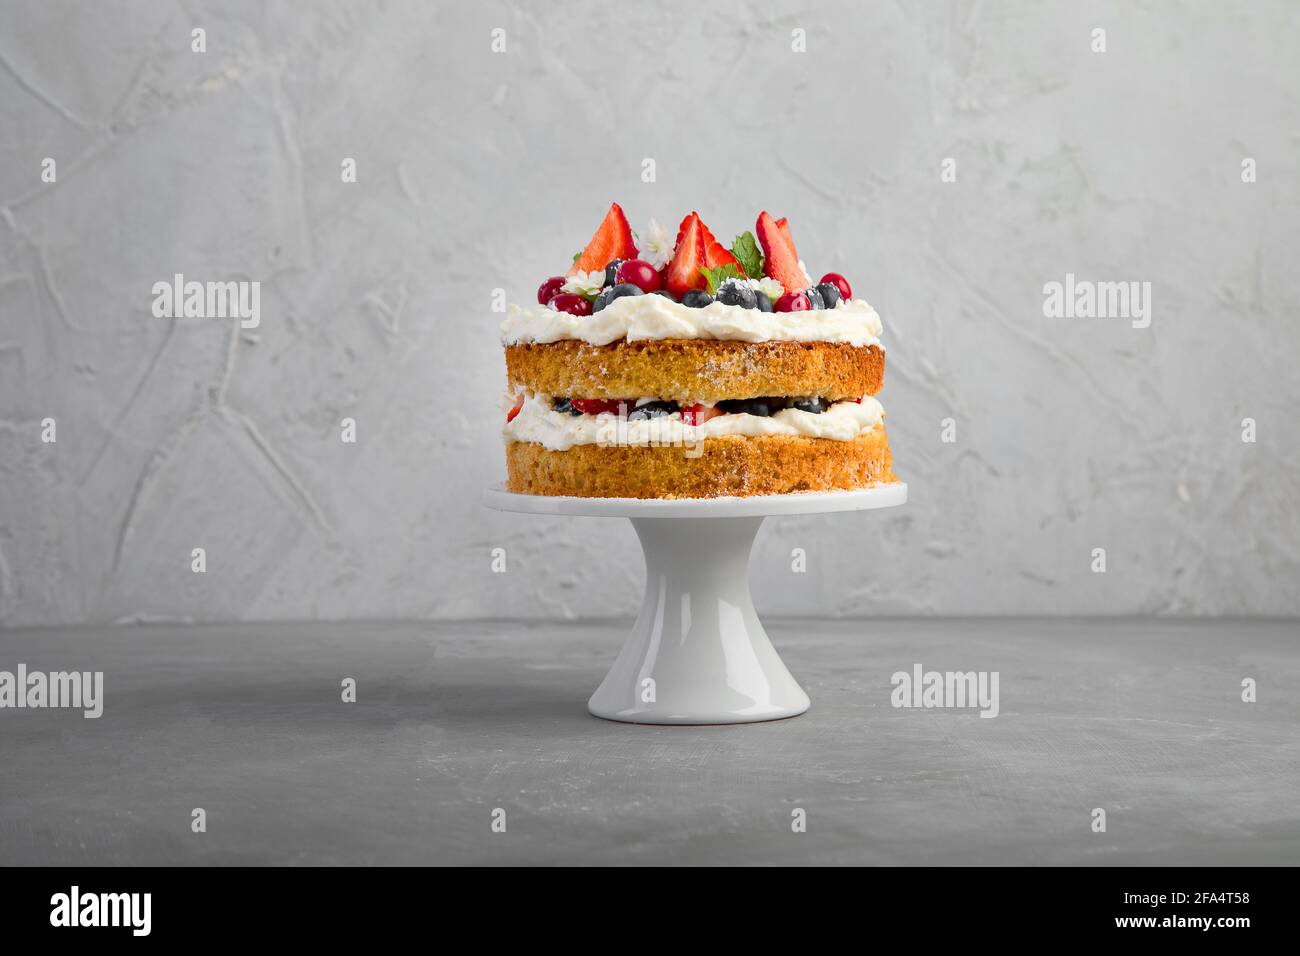 Delicious homemade cake with fresh berries and mascarpone cream on gray background. Stock Photo